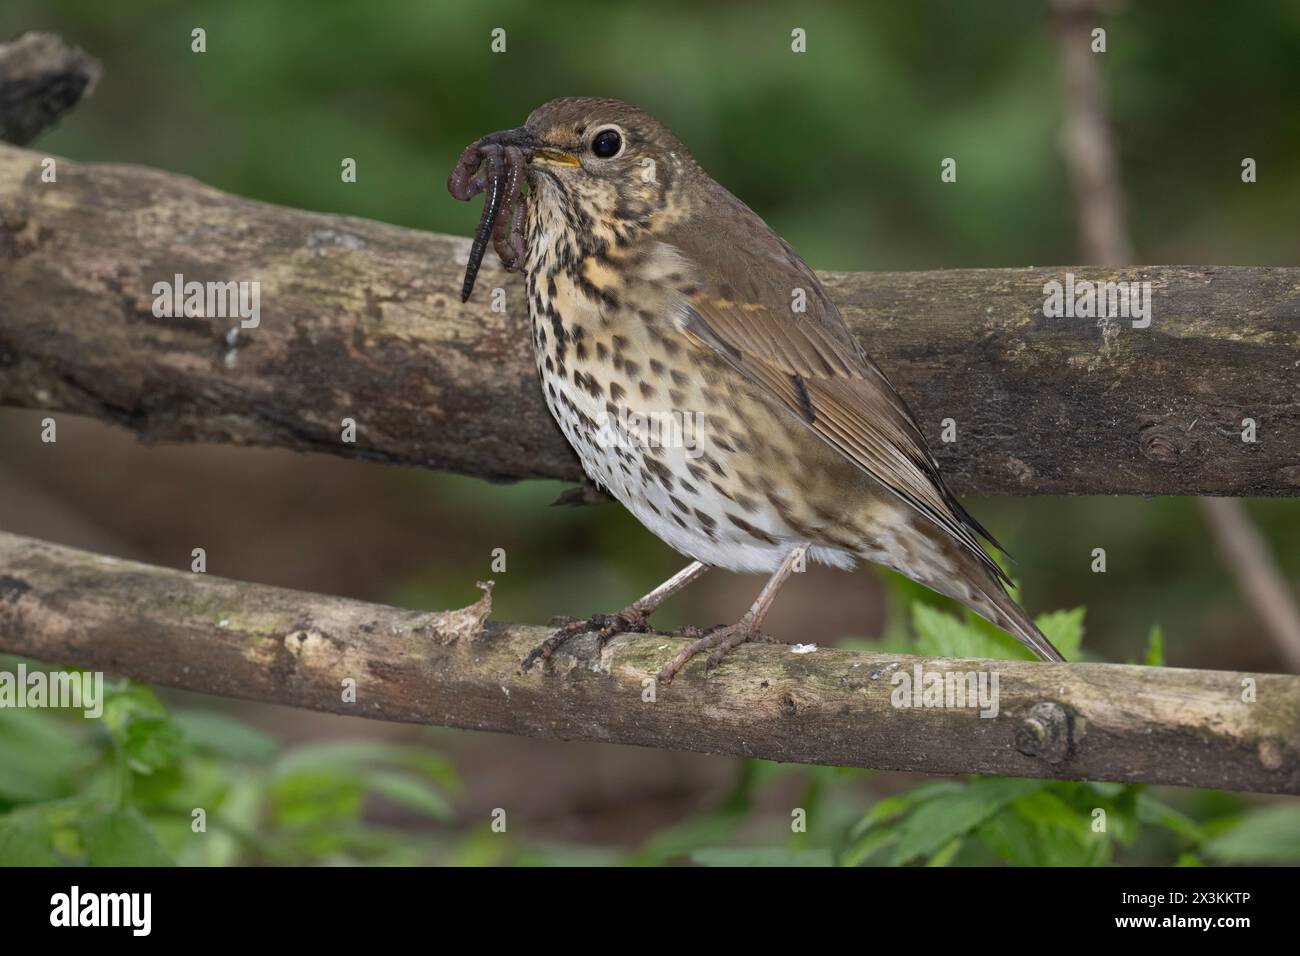 Adult Song Thrush, Turdus philomelos,  with worm in its beak, Queen's Park, London, United Kingdom Stock Photo